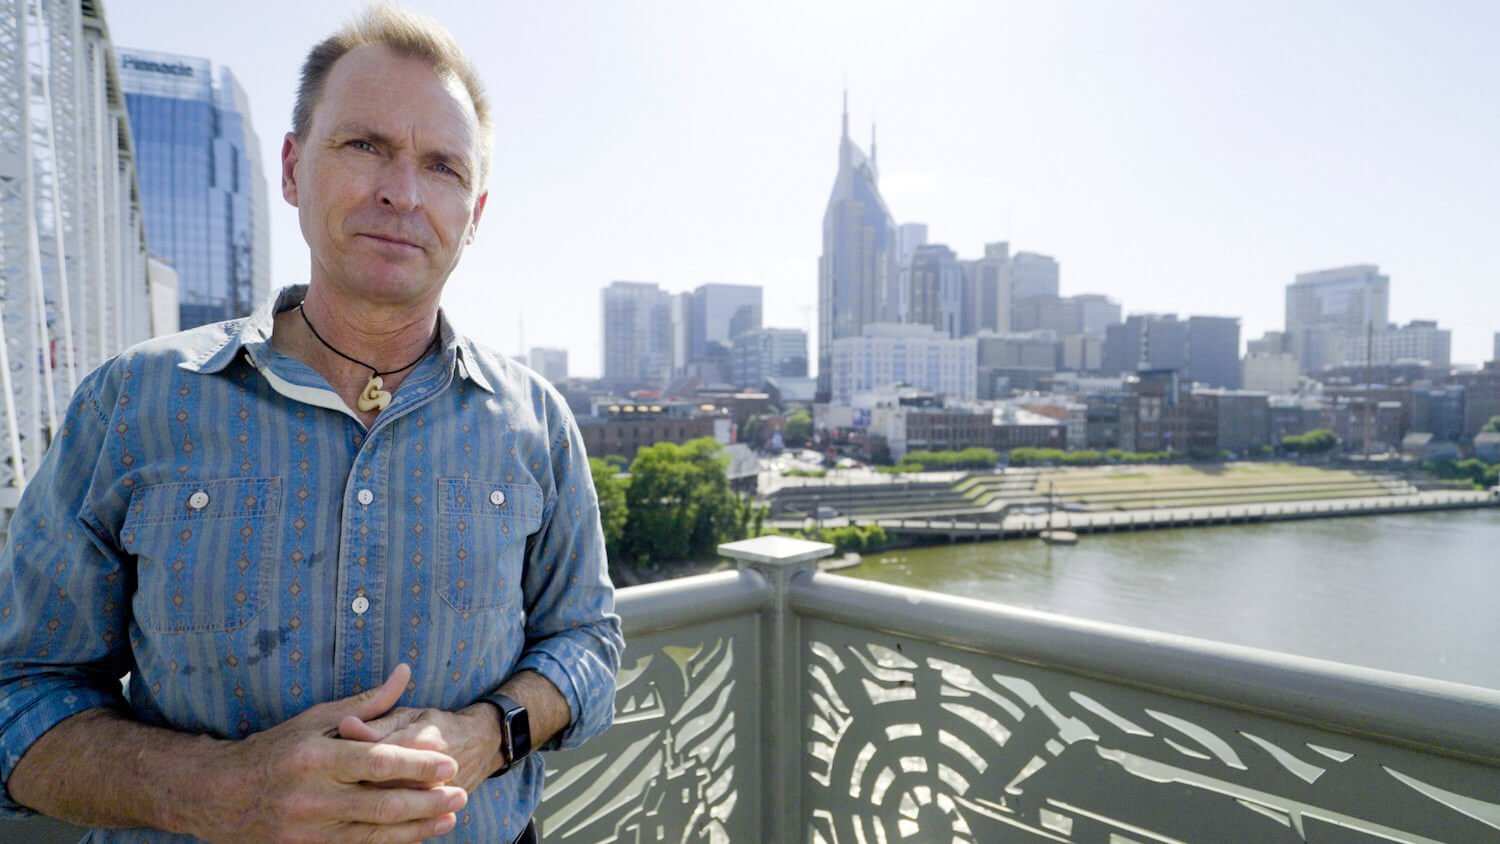 'The Amazing Race' host Phil Keoghan with a city in the background